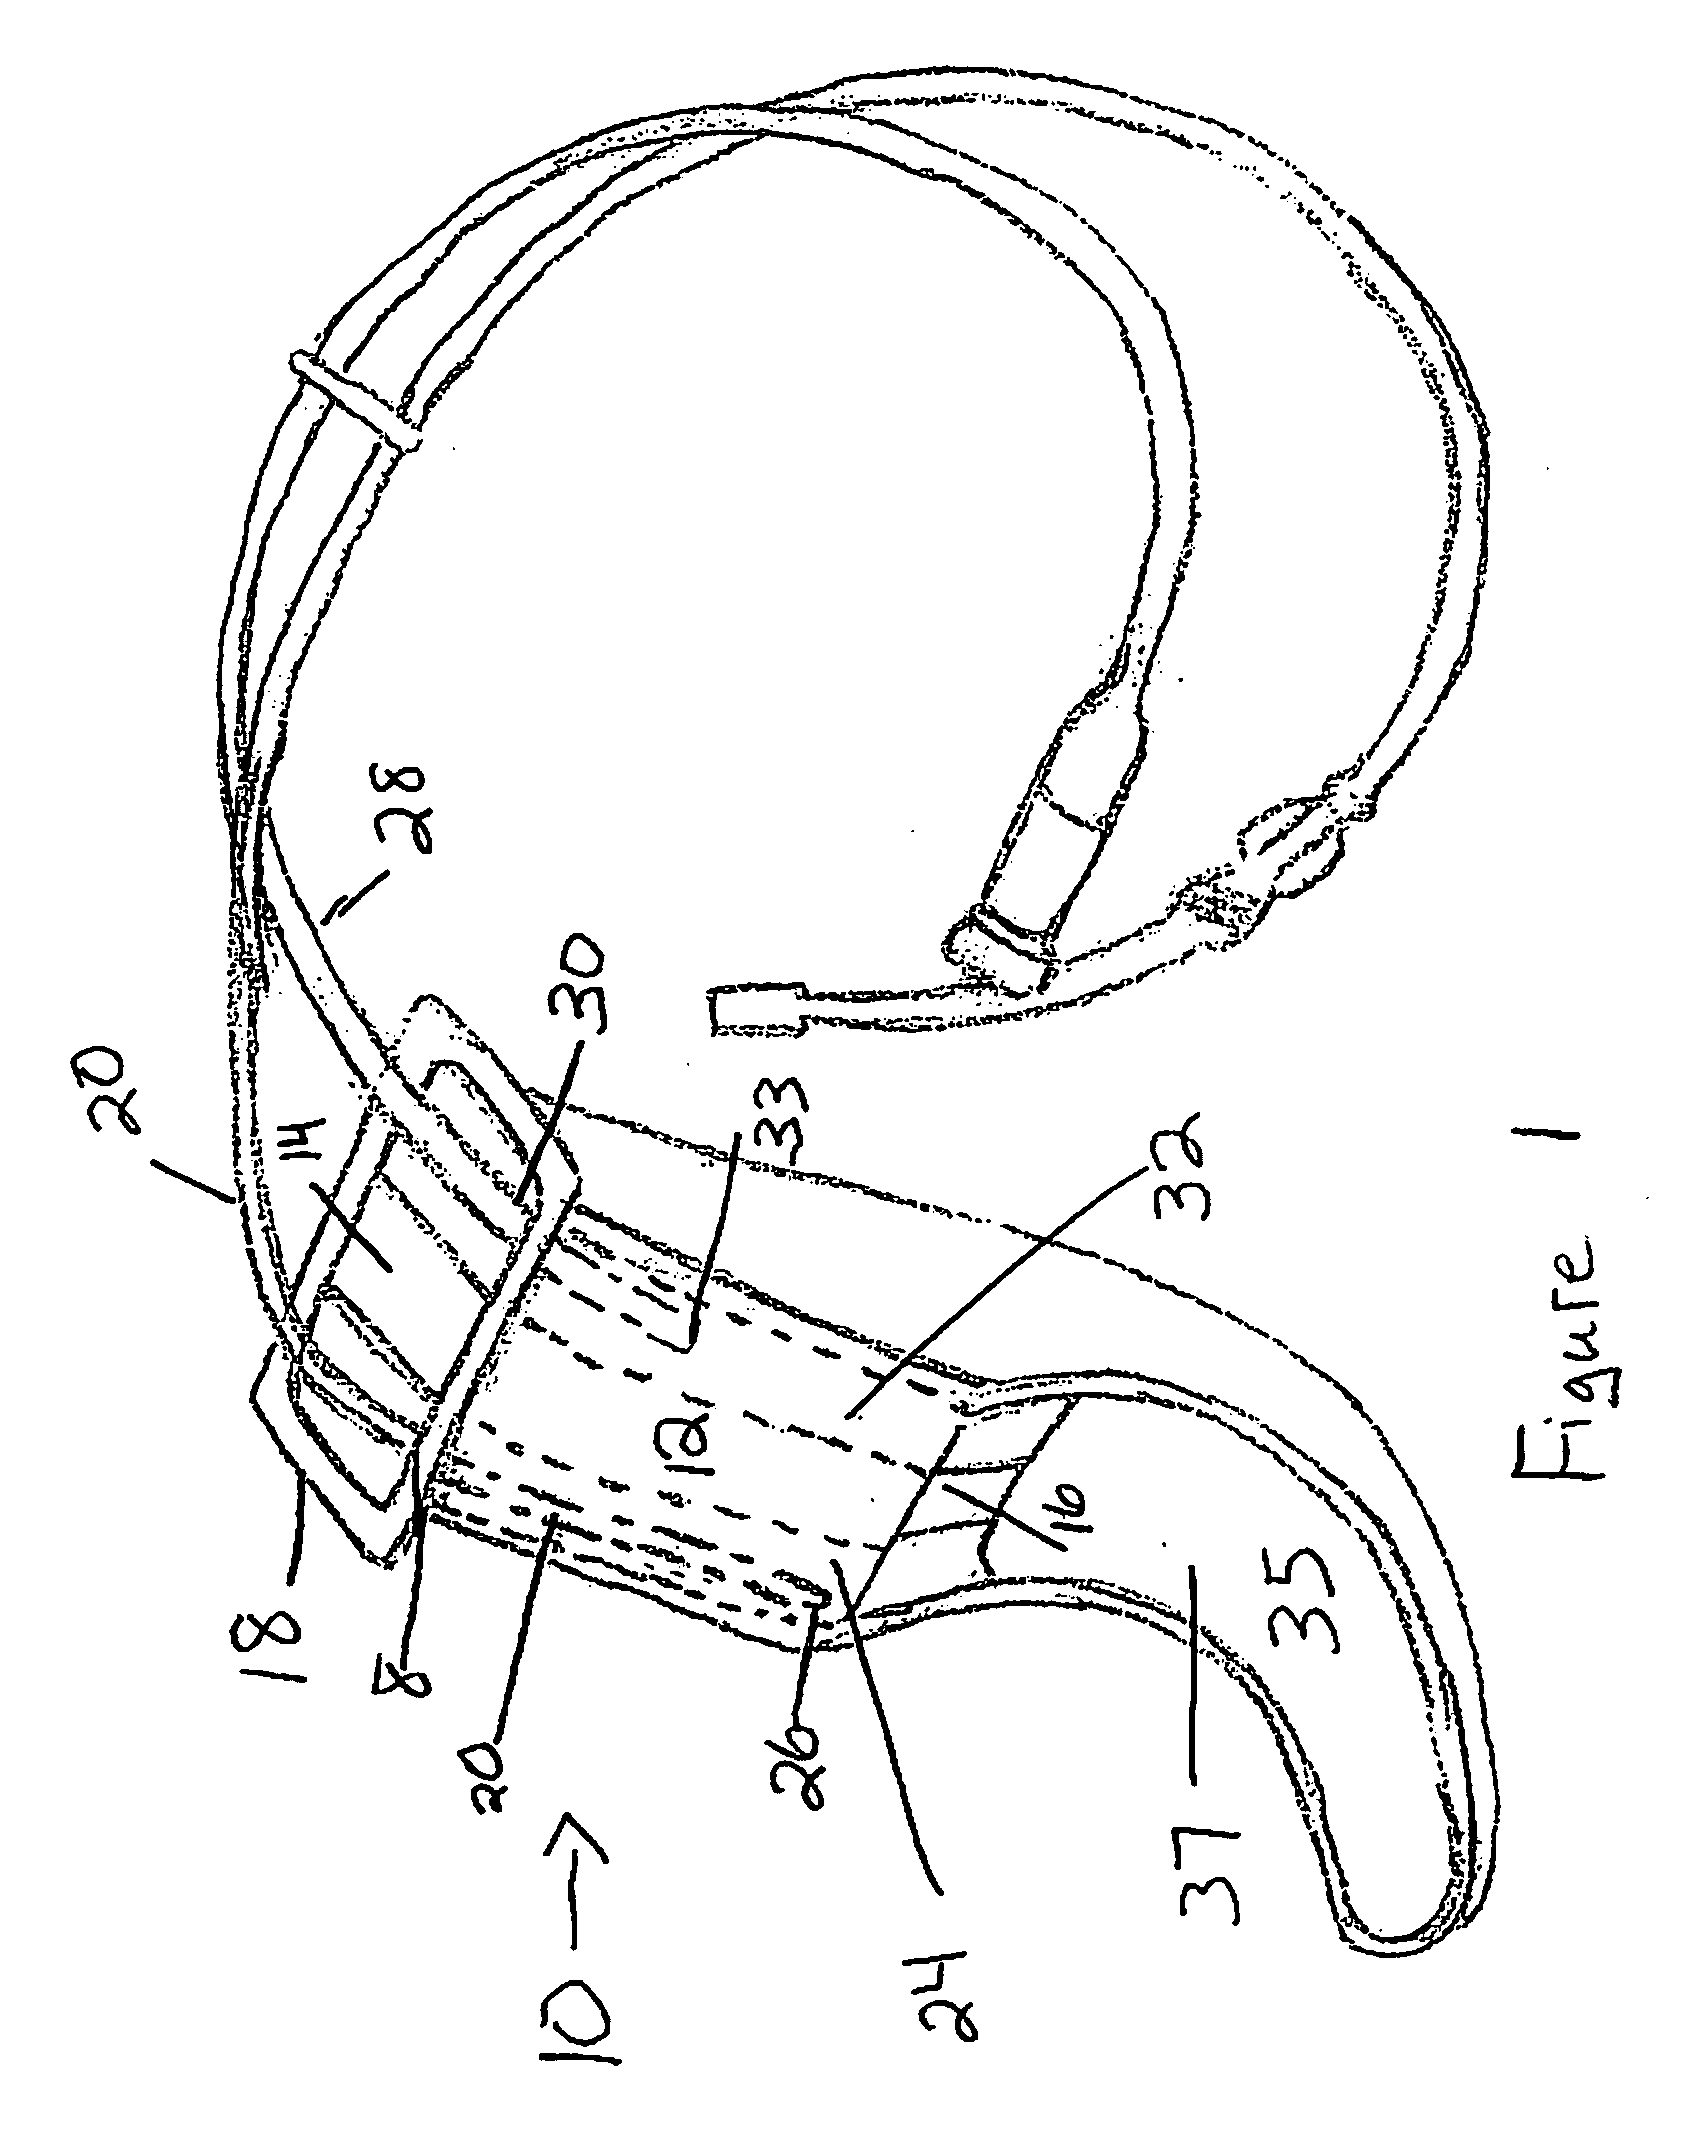 Oral airway for endoscopic and intubating procedures